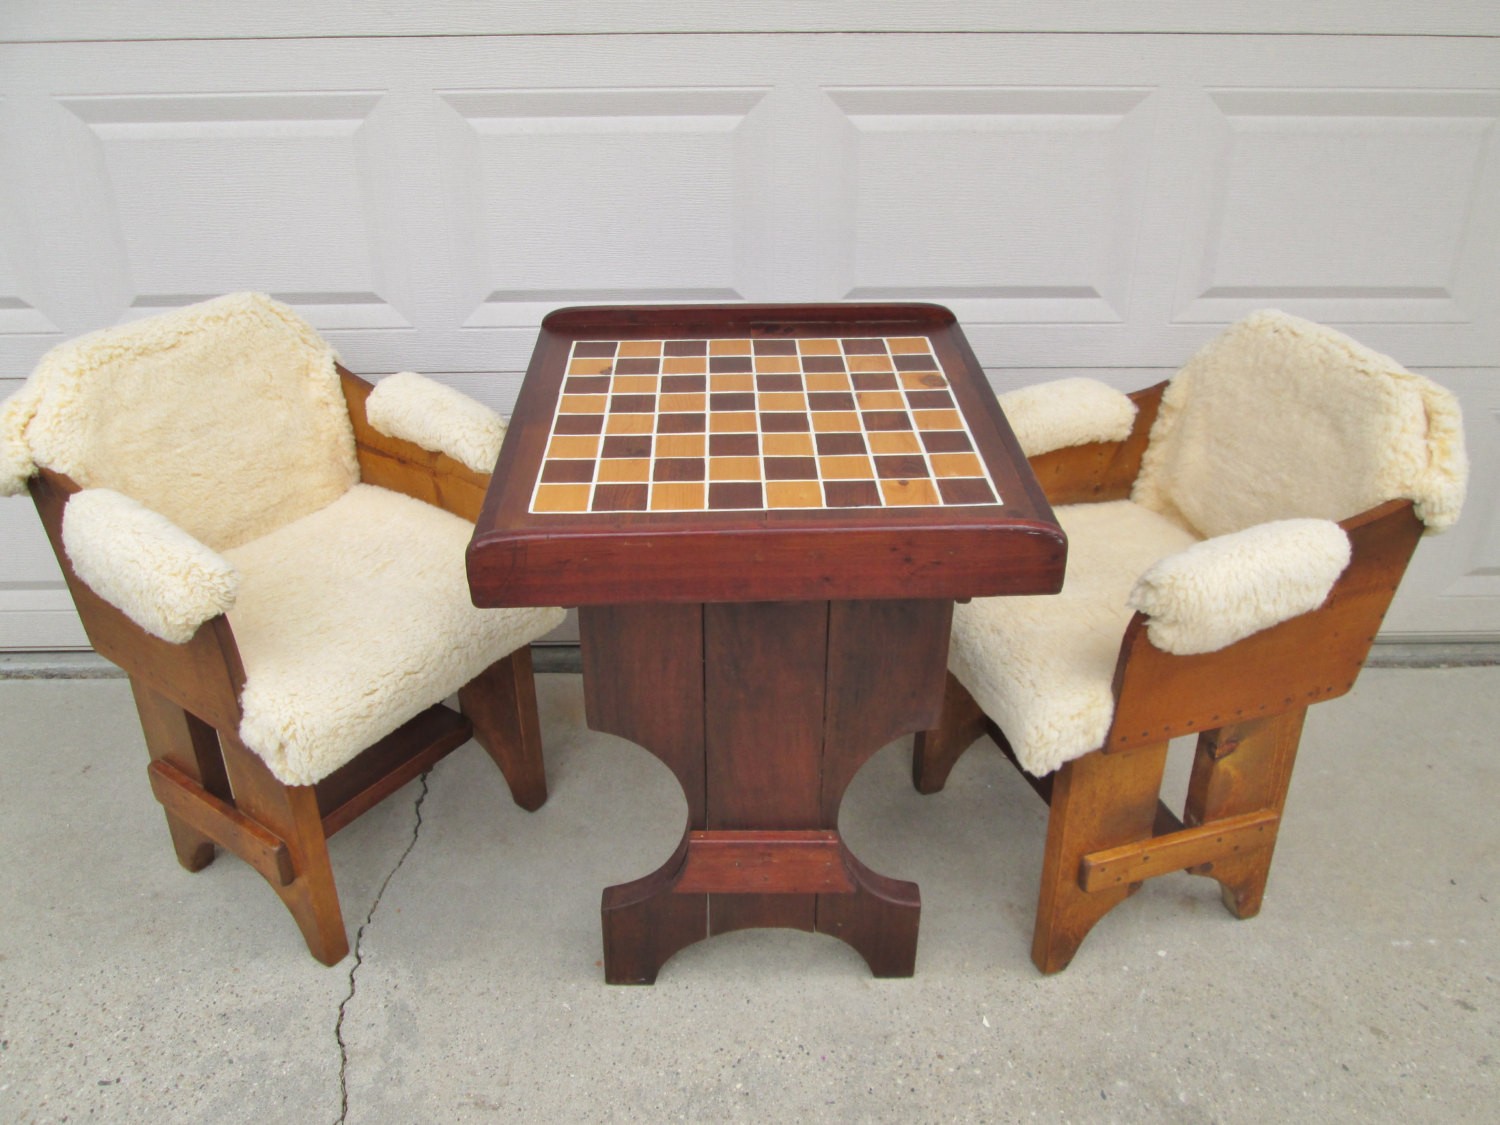 Table chess